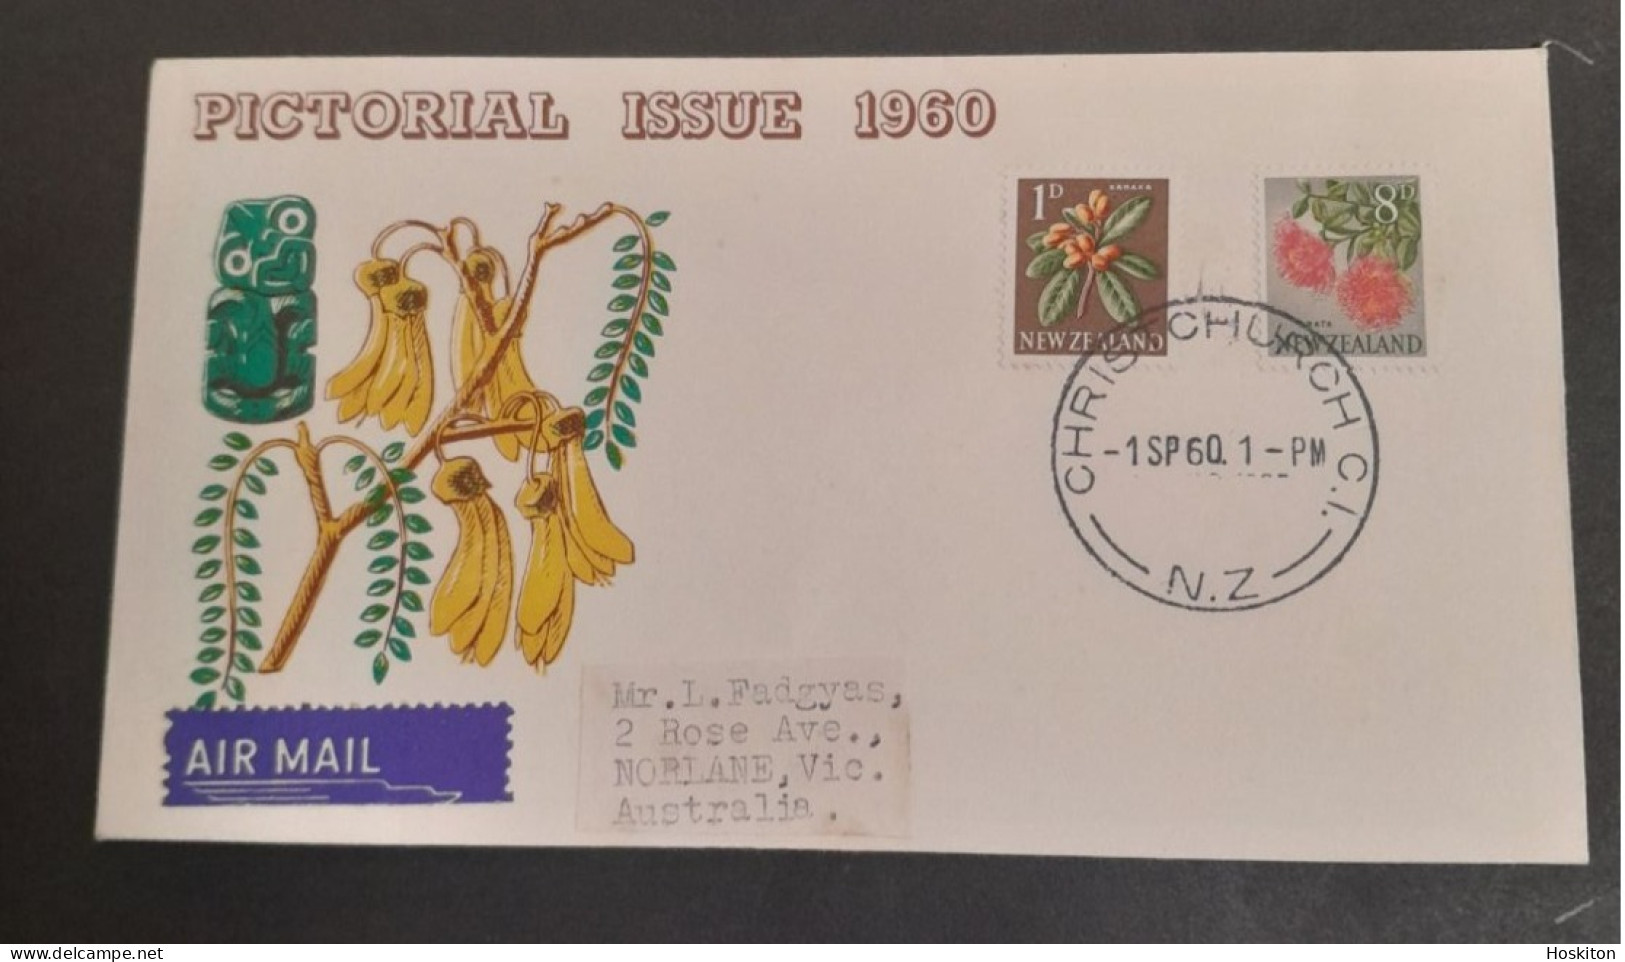 Pictorial Issue 1960 First Day Cover - Covers & Documents